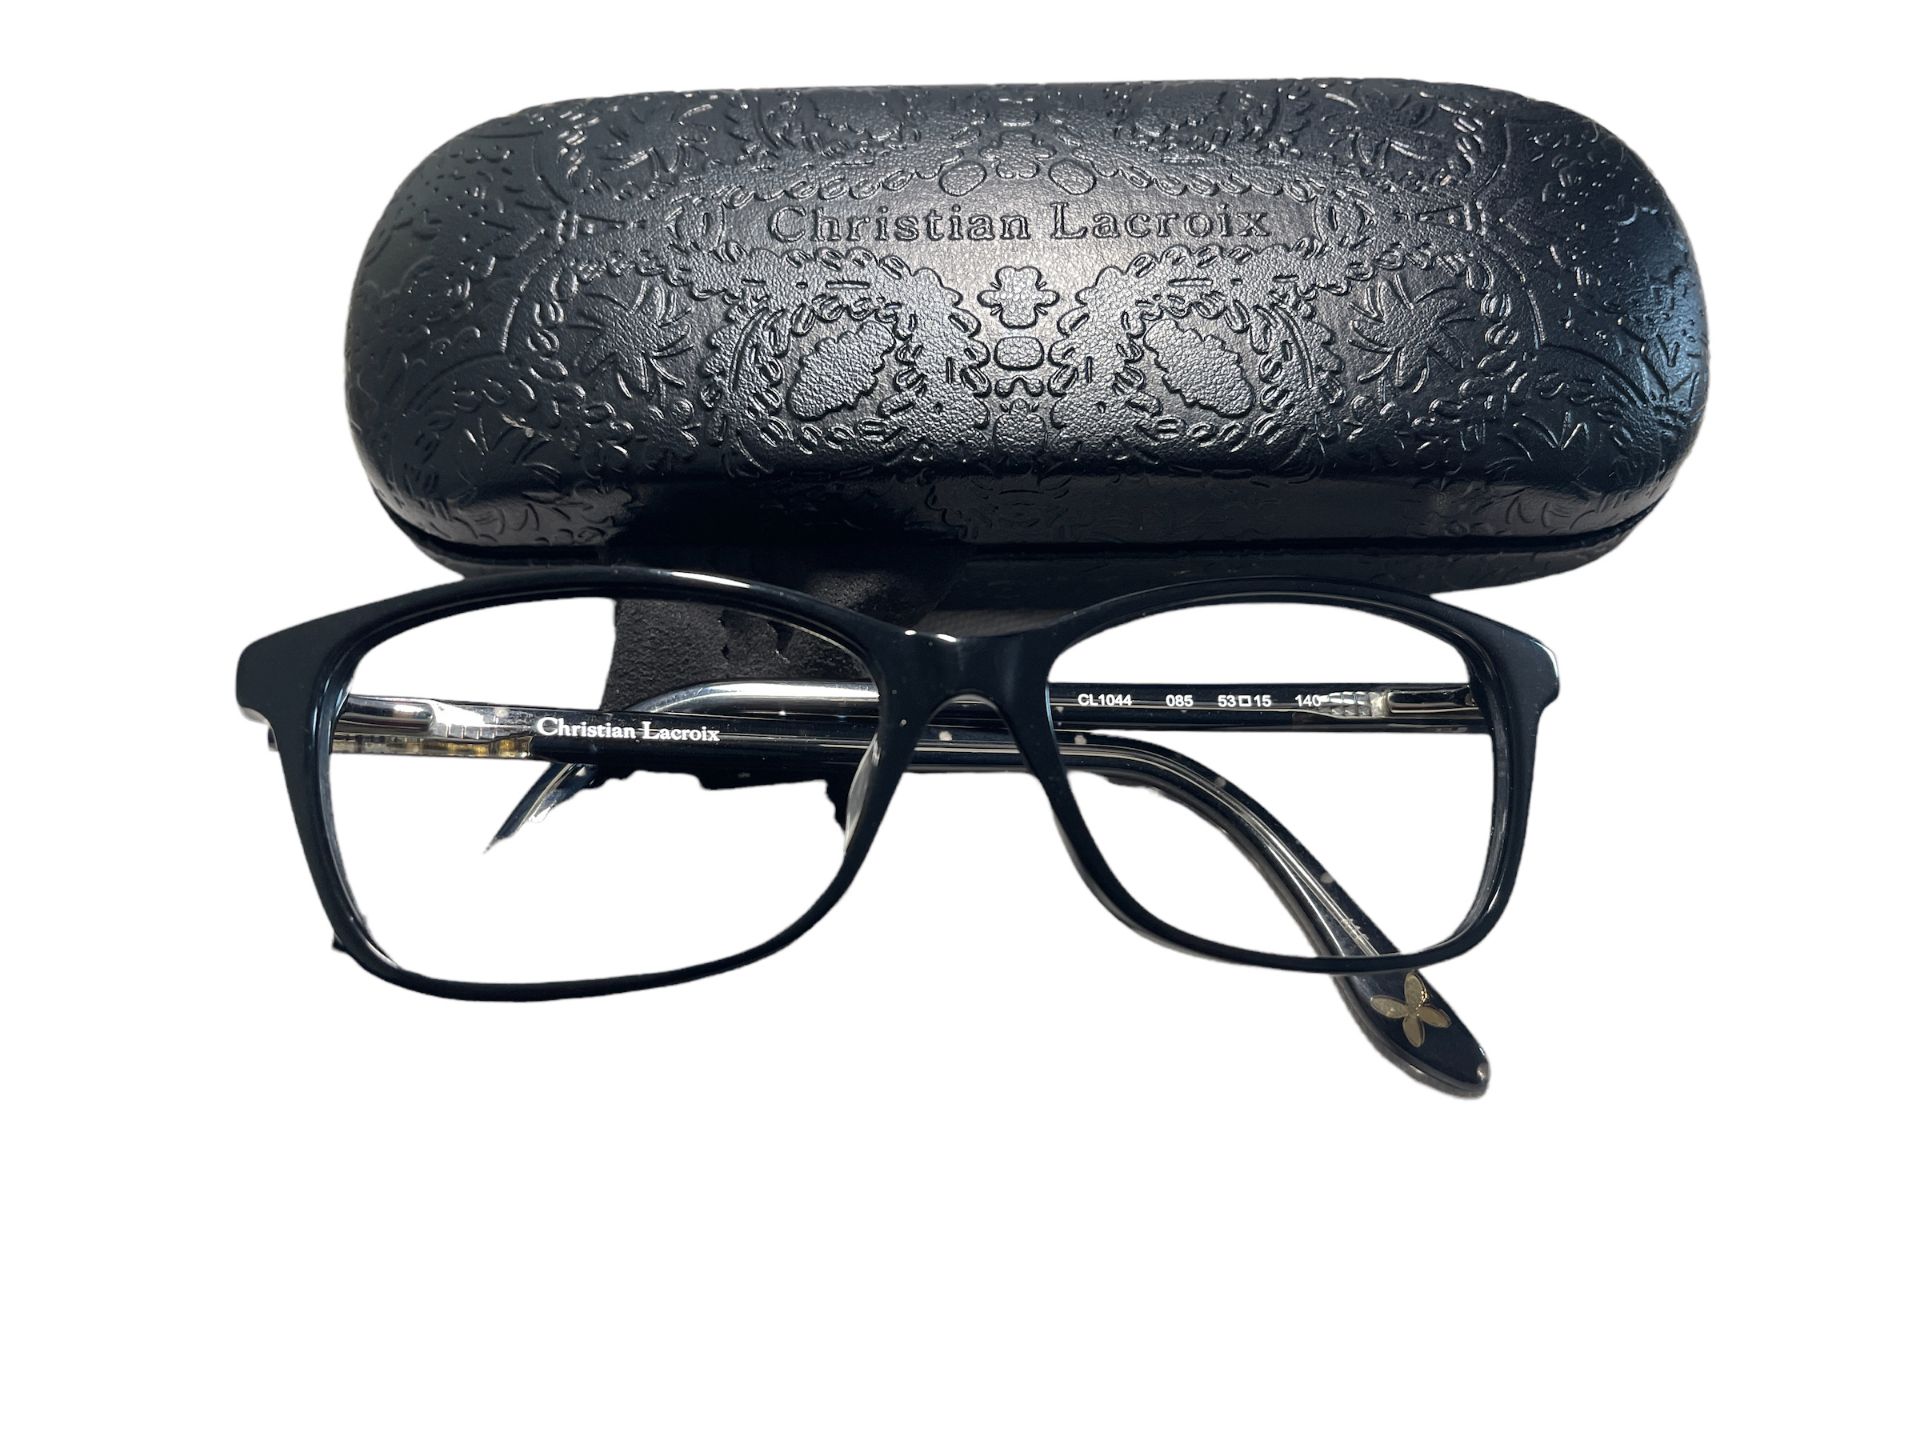 Christian Lacroix Spectacle Frames - Ex Demo or Surplus Stock from our Private Jet Charter